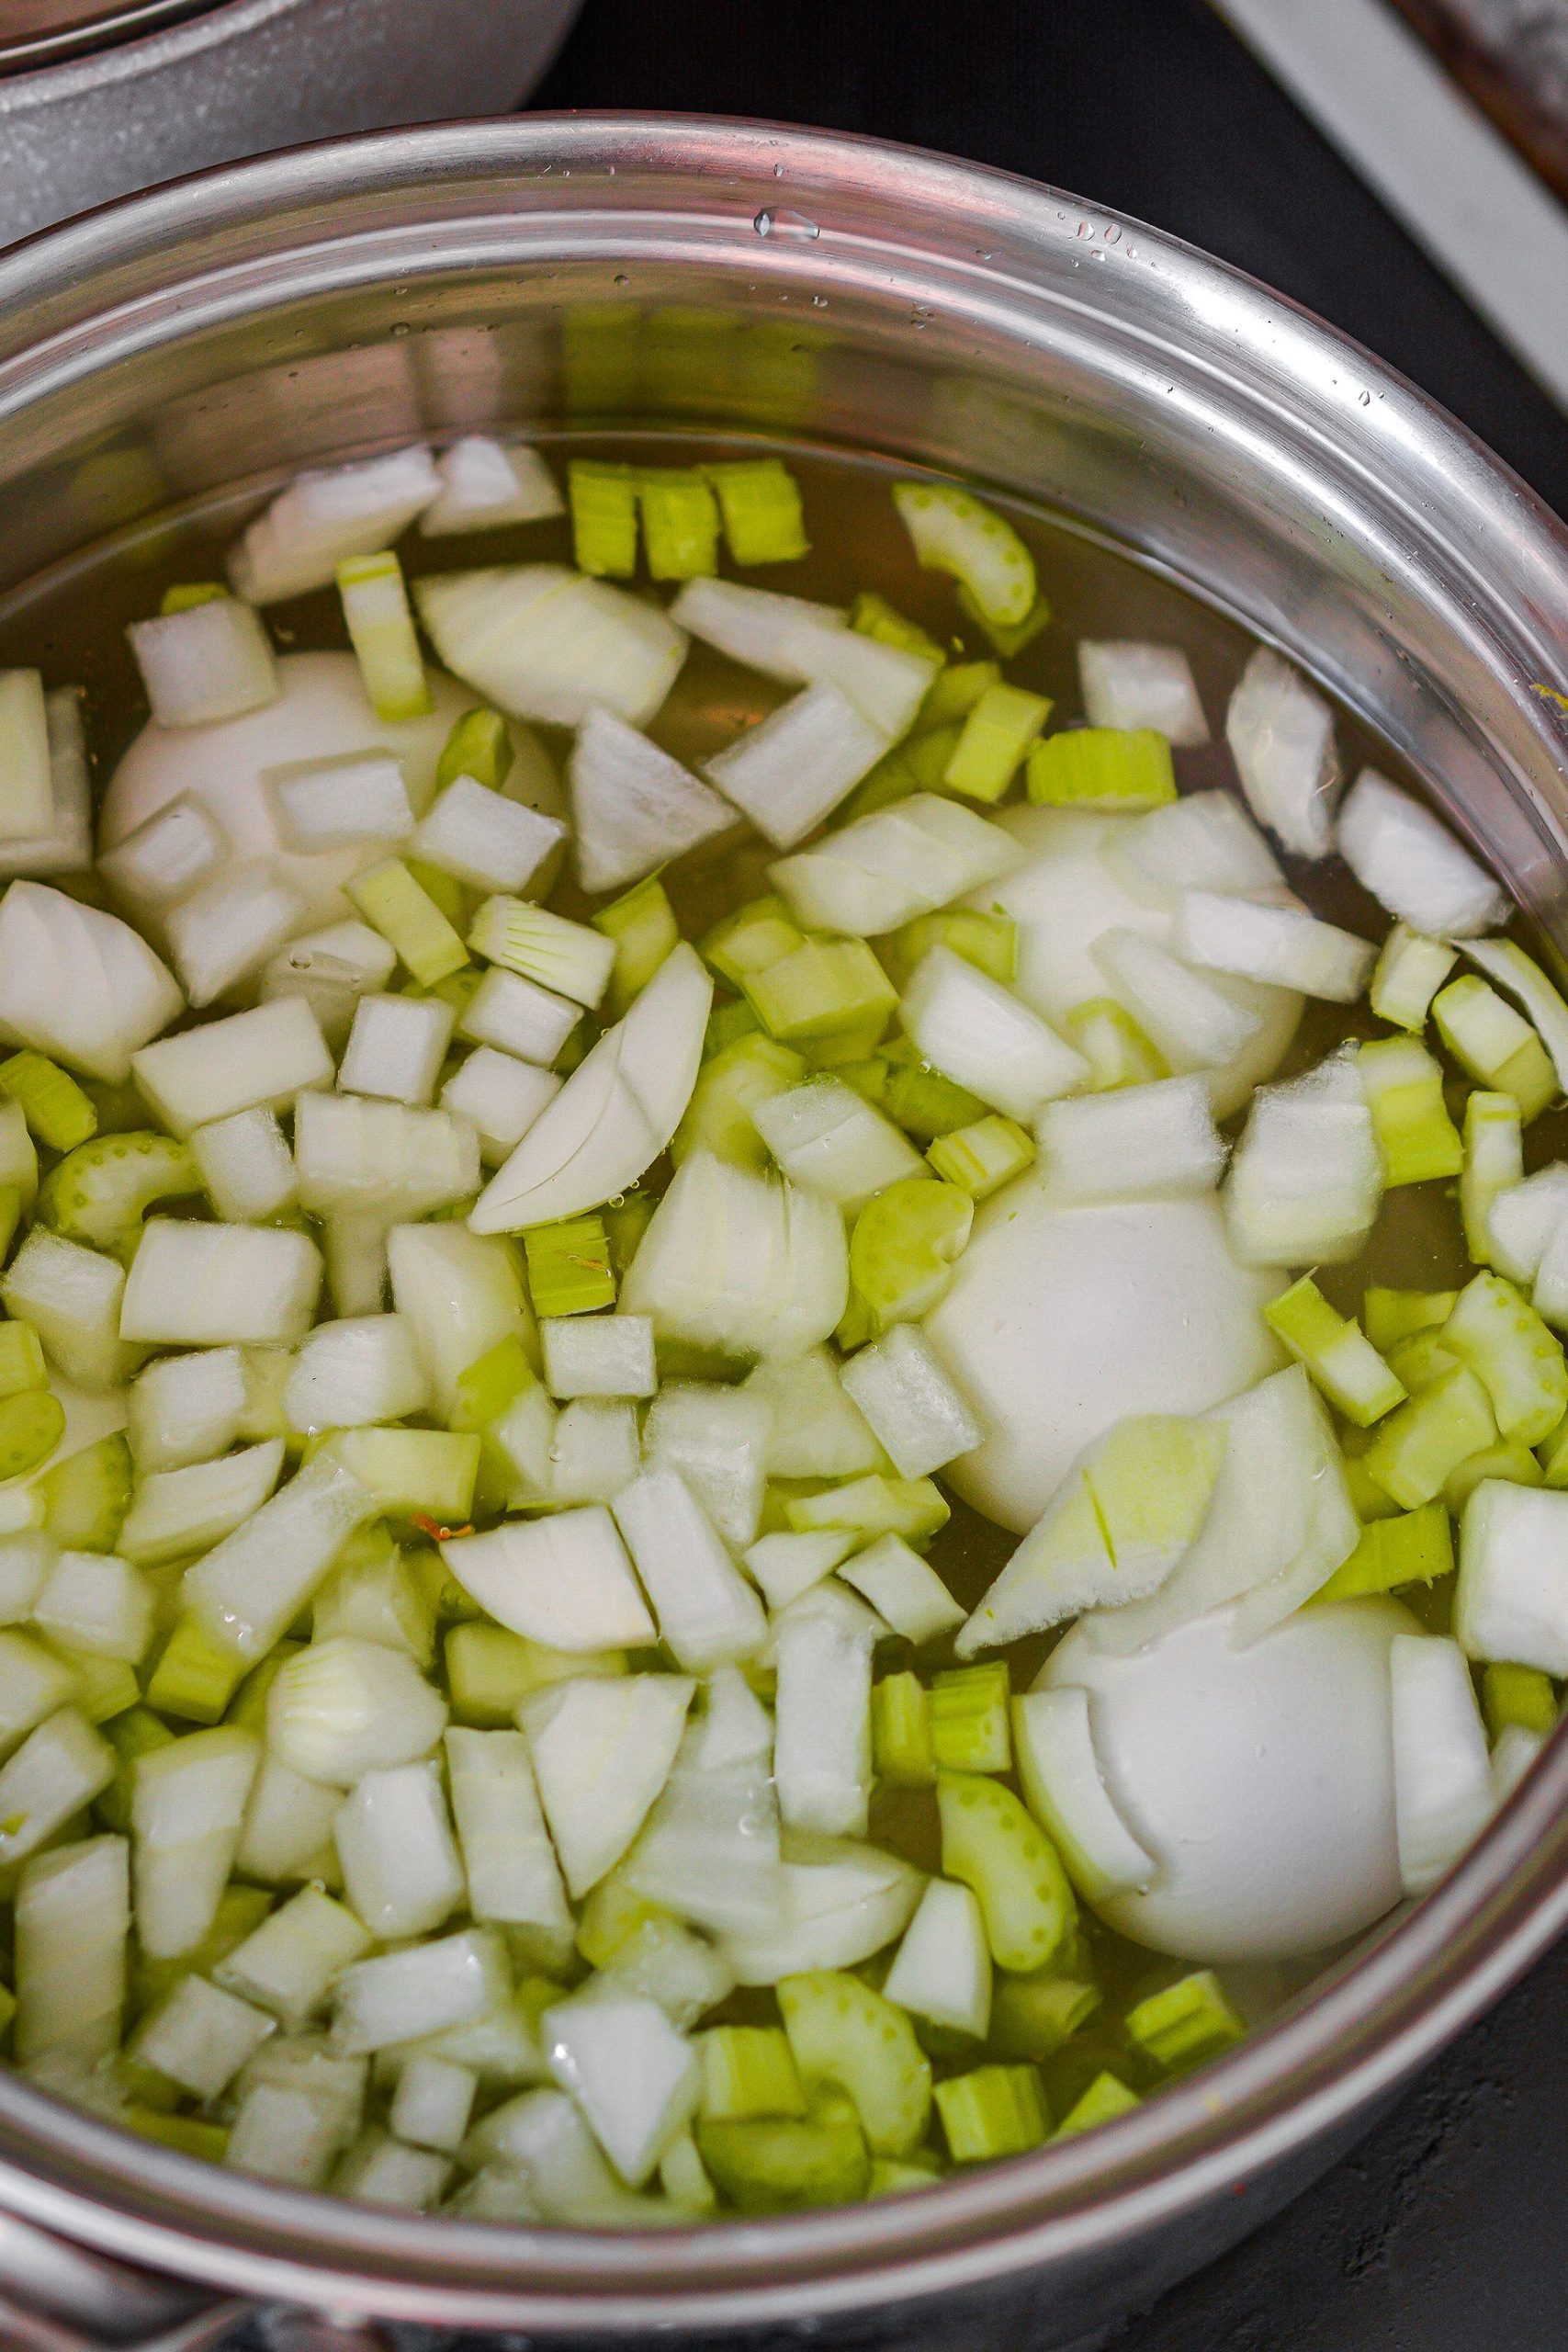 Add the onion and celery to a pot with the eggs and cover with water. Bring to a boil and cook for 15 minutes. Drain, rinse the eggs in cold water, peel the eggs and chop them well.